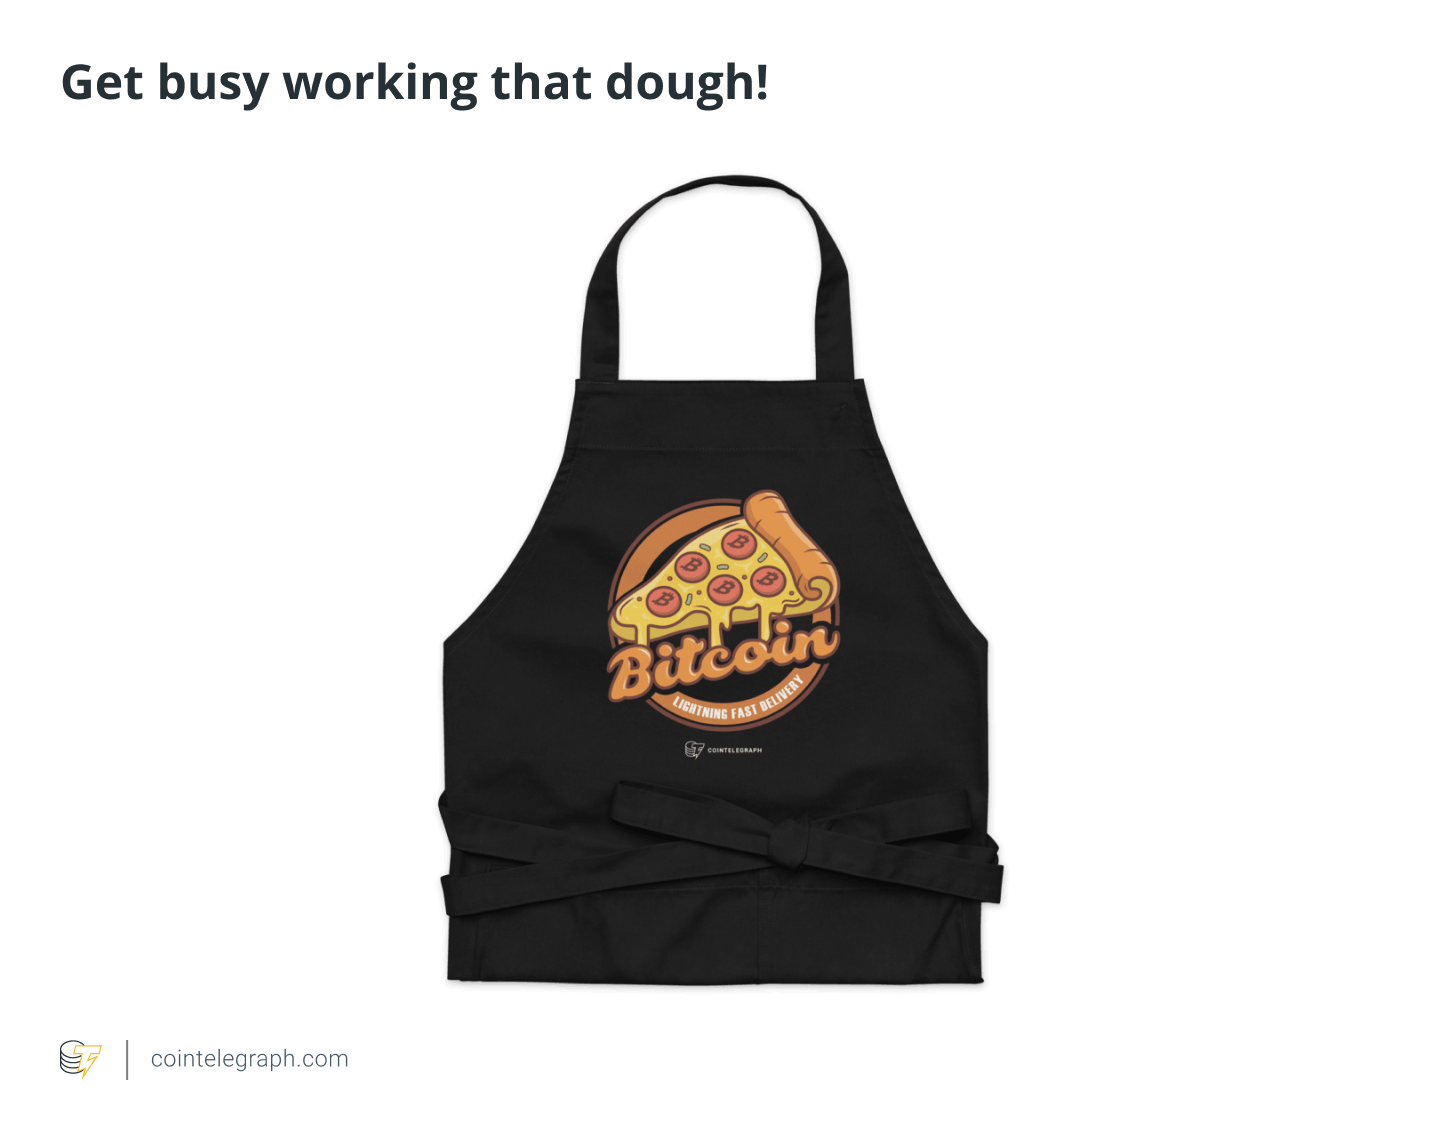 Bitcoin Pizza Day merch delivers lightning-fast style